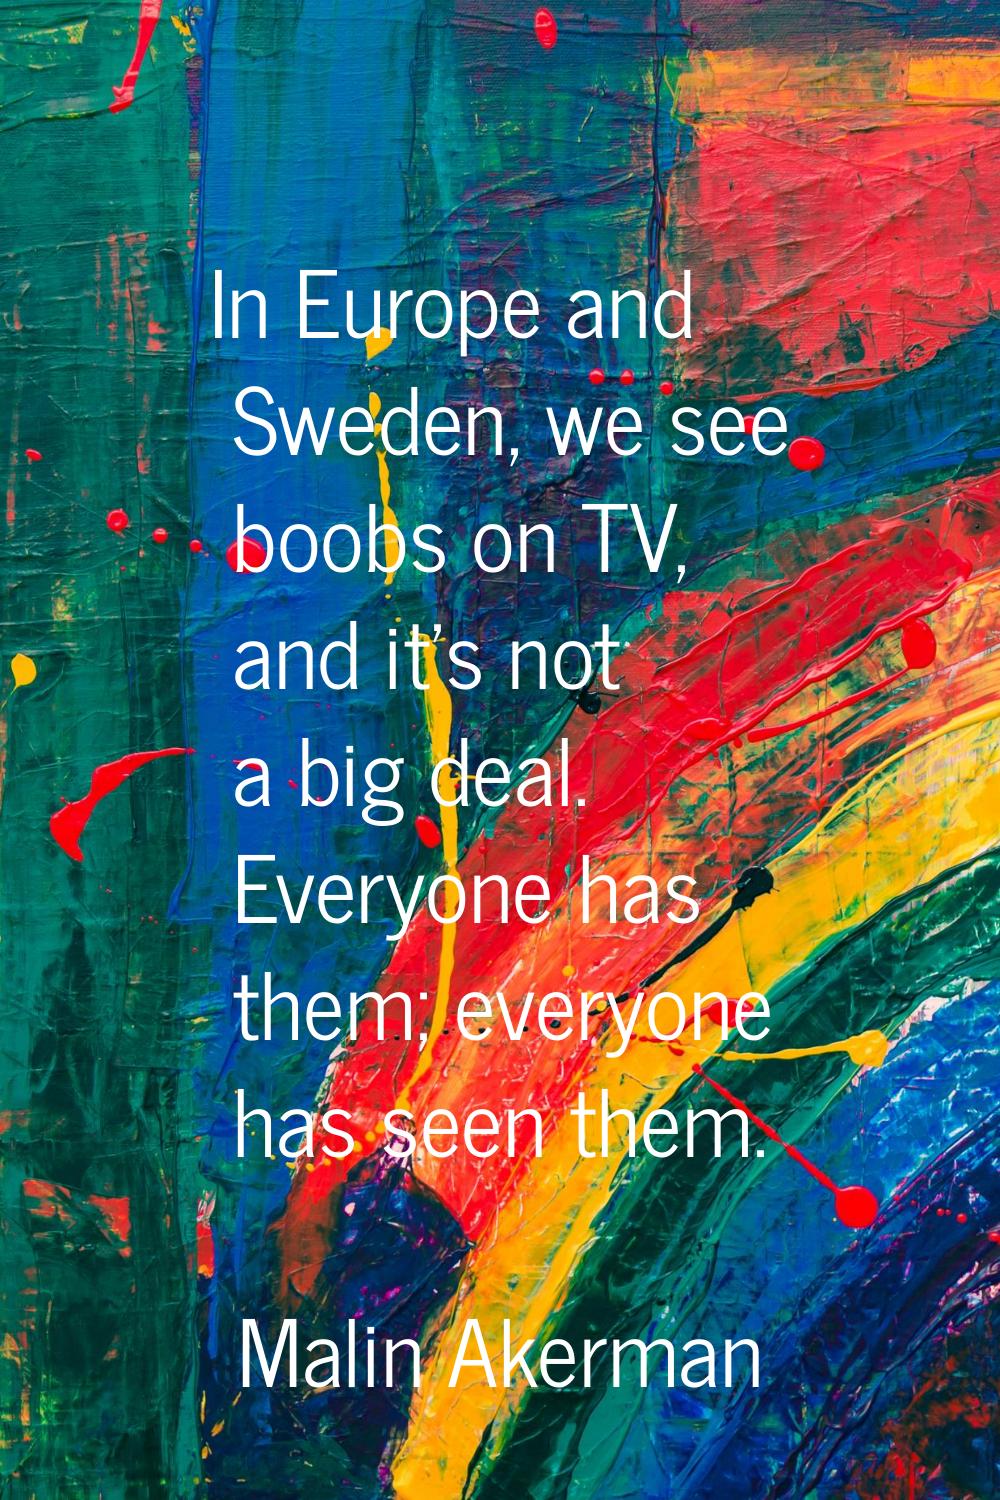 In Europe and Sweden, we see boobs on TV, and it's not a big deal. Everyone has them; everyone has 